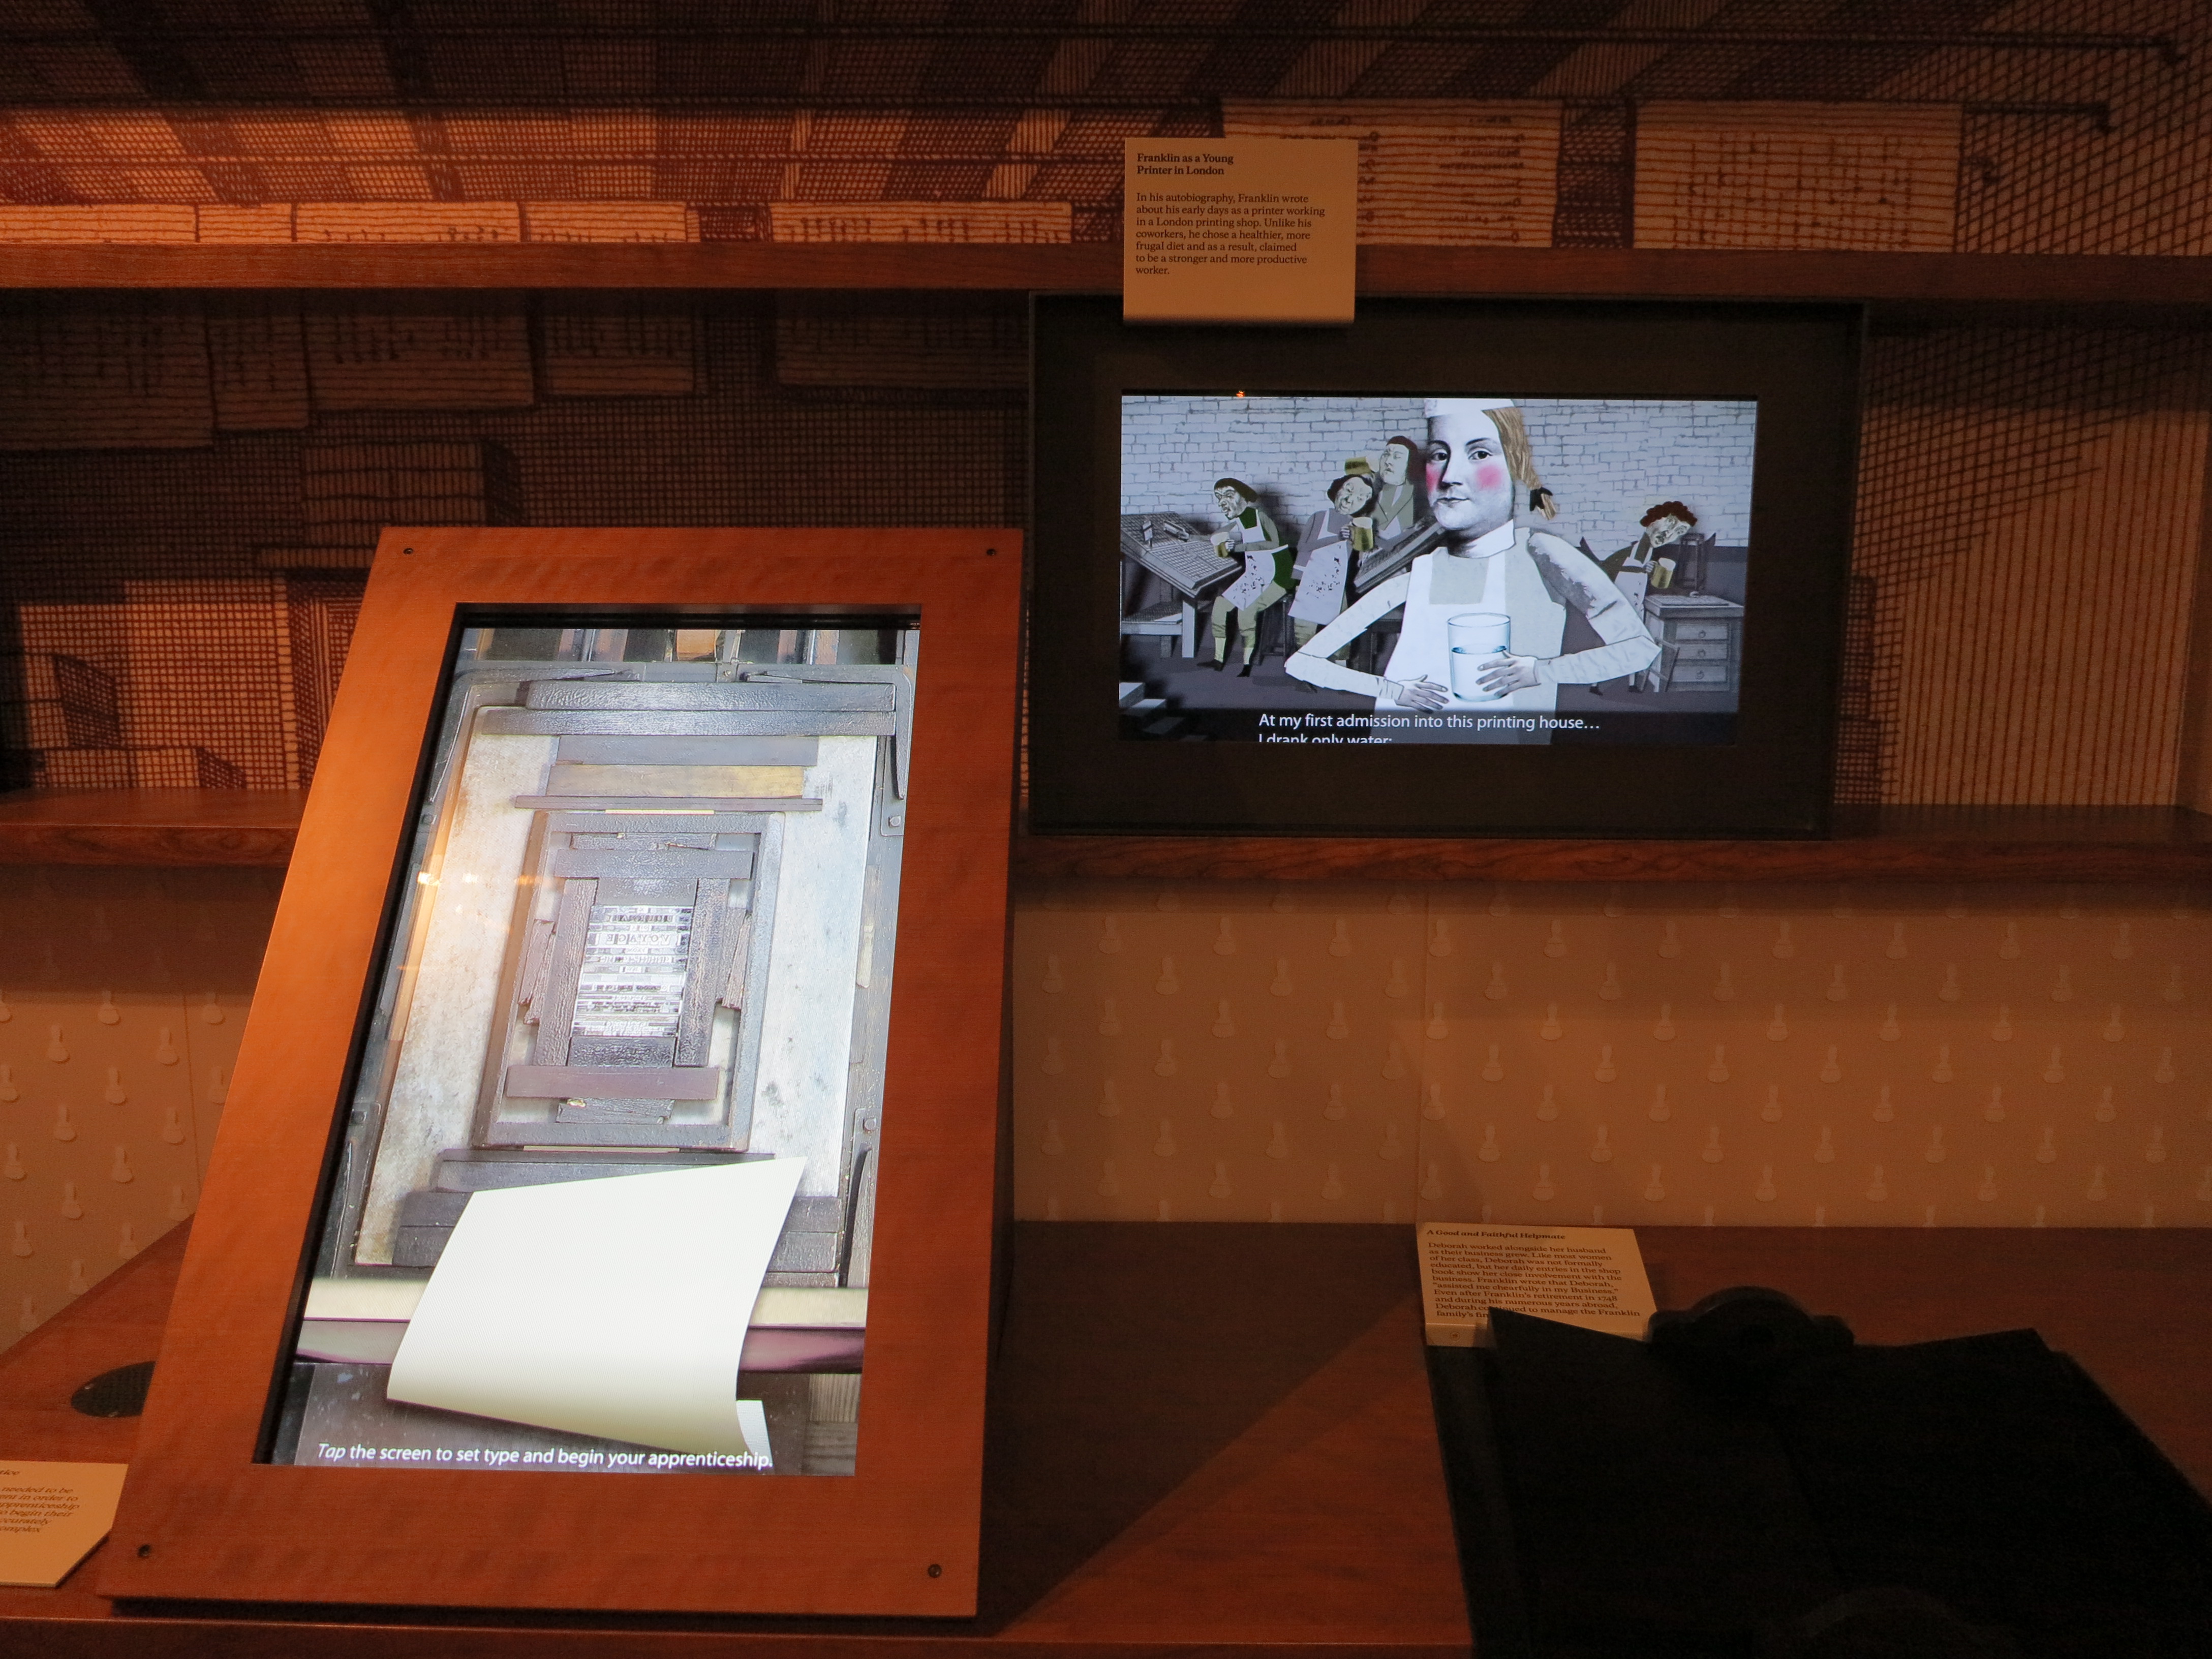 Interactive and video displays about Franklin's background as a printer.